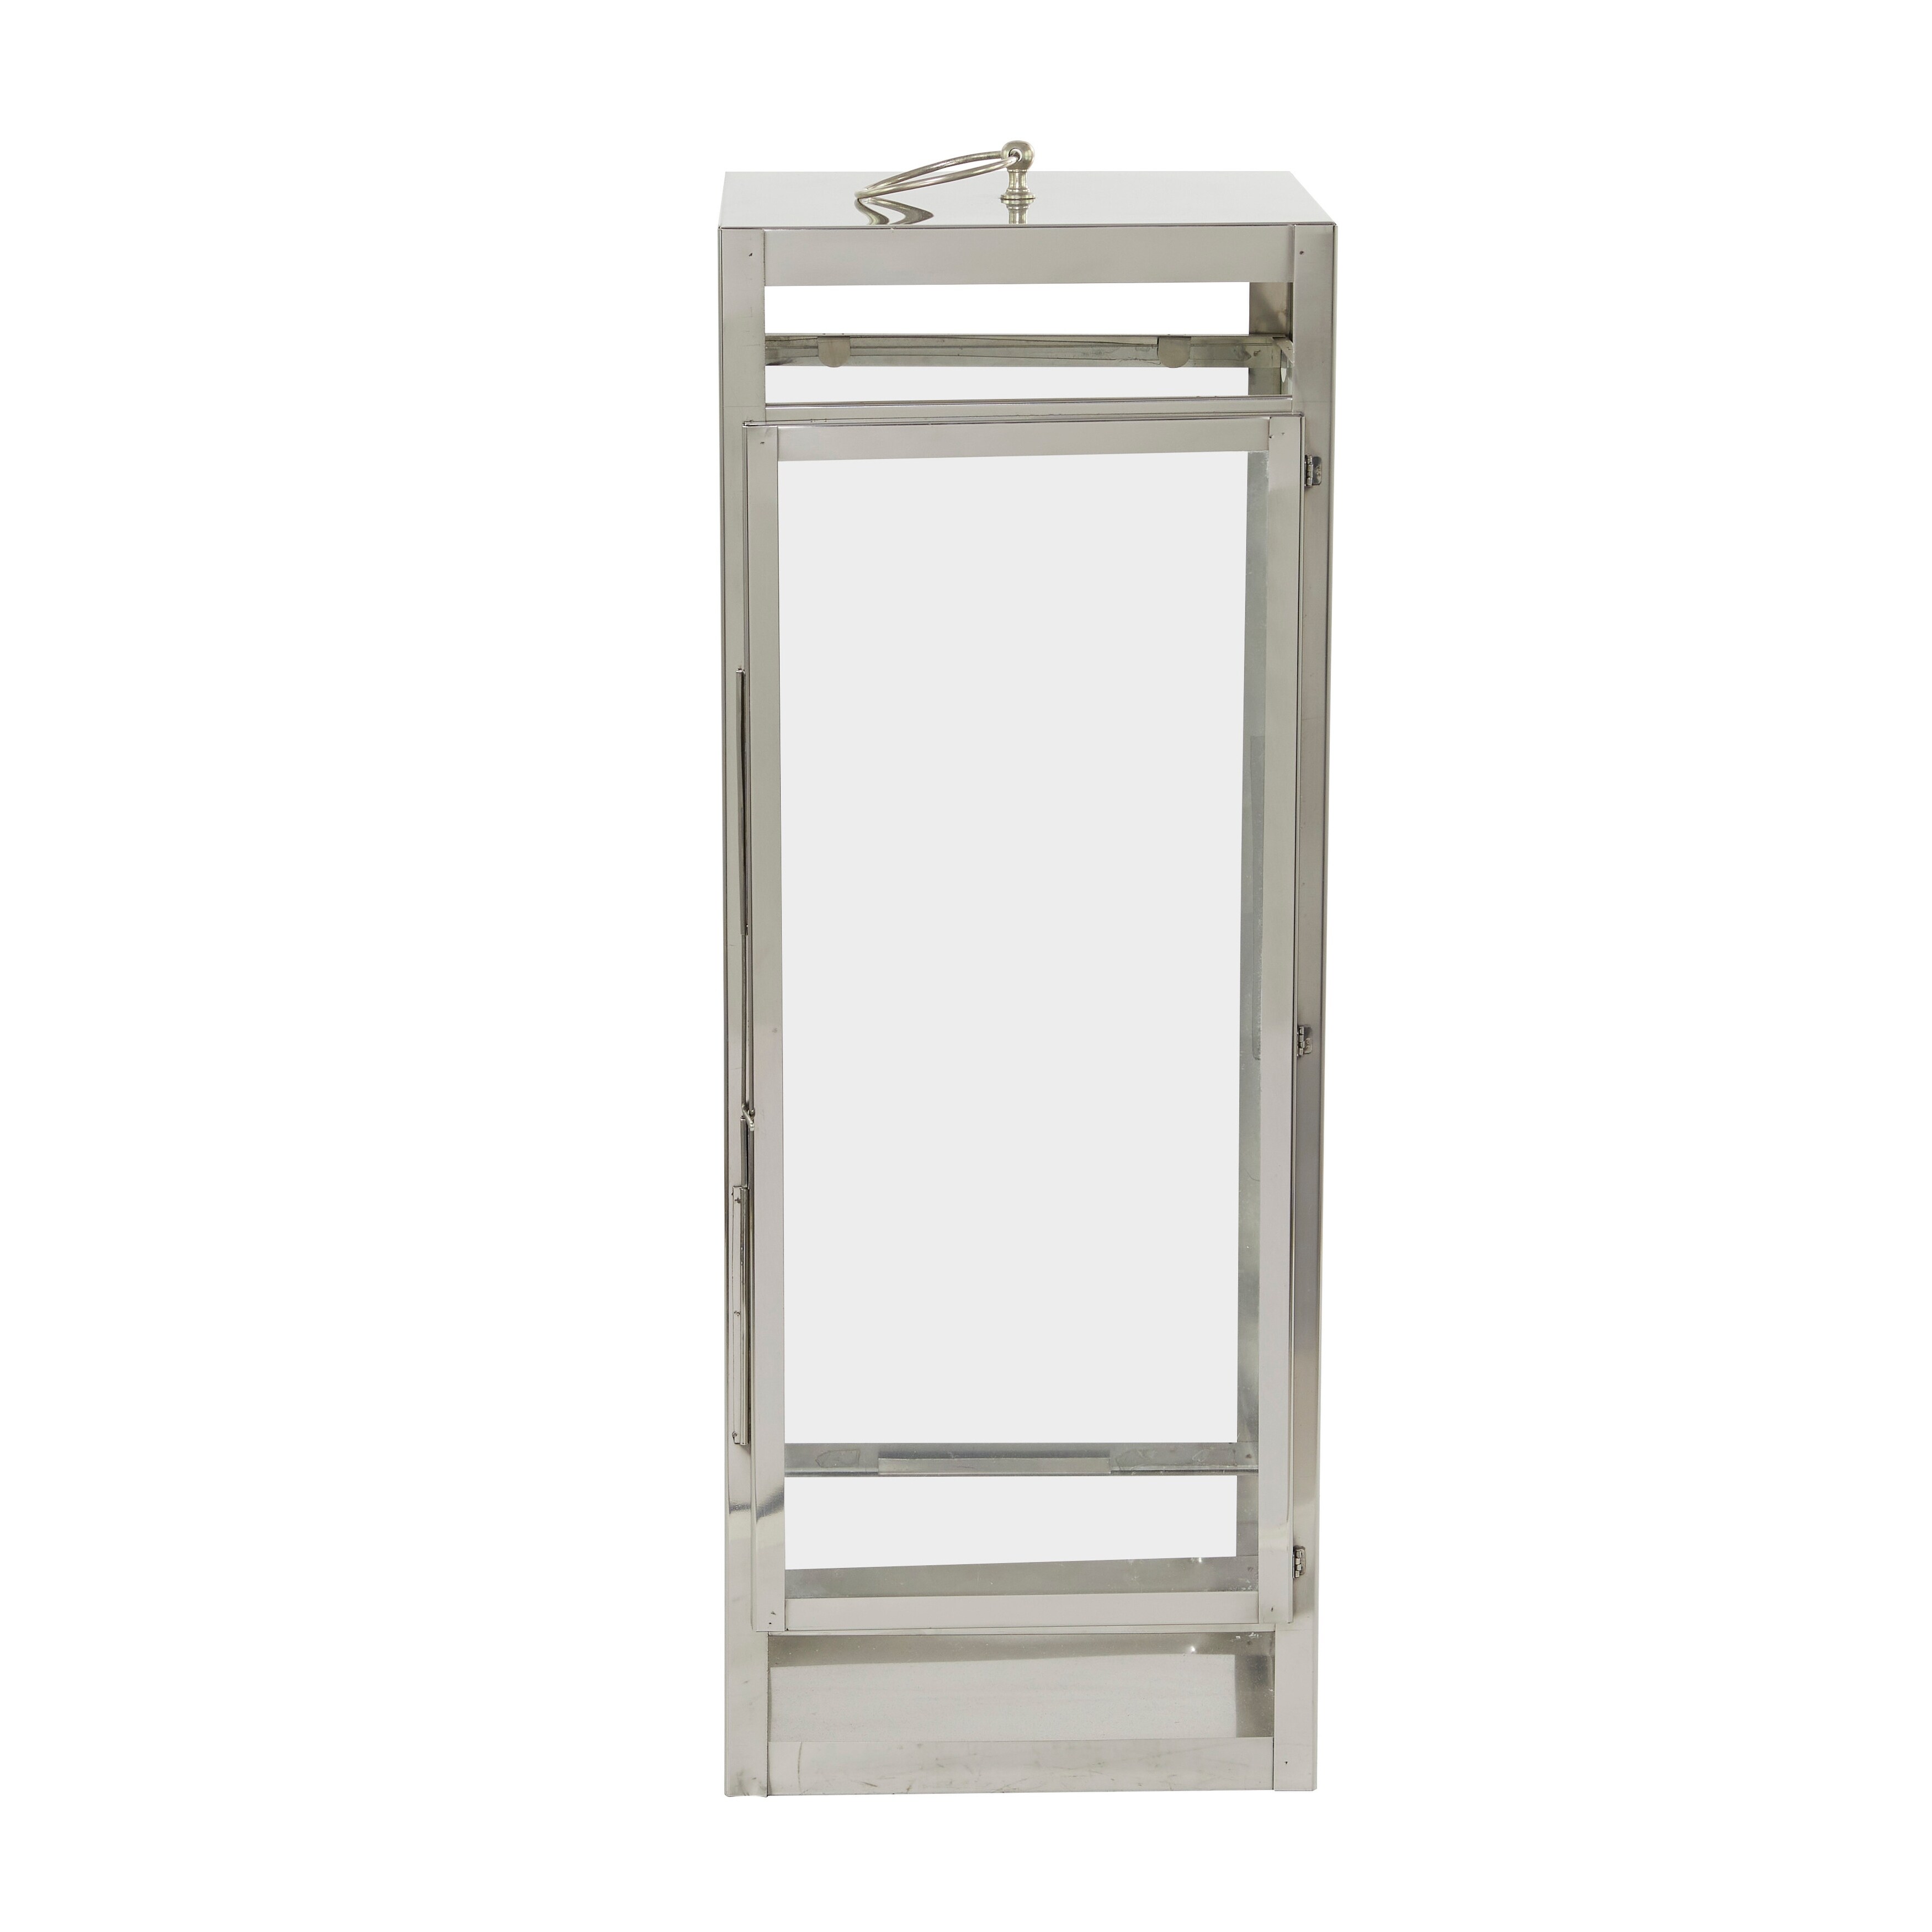 Stainless Steel Contemporary Lantern - 11 x 11 x 32 - Silver